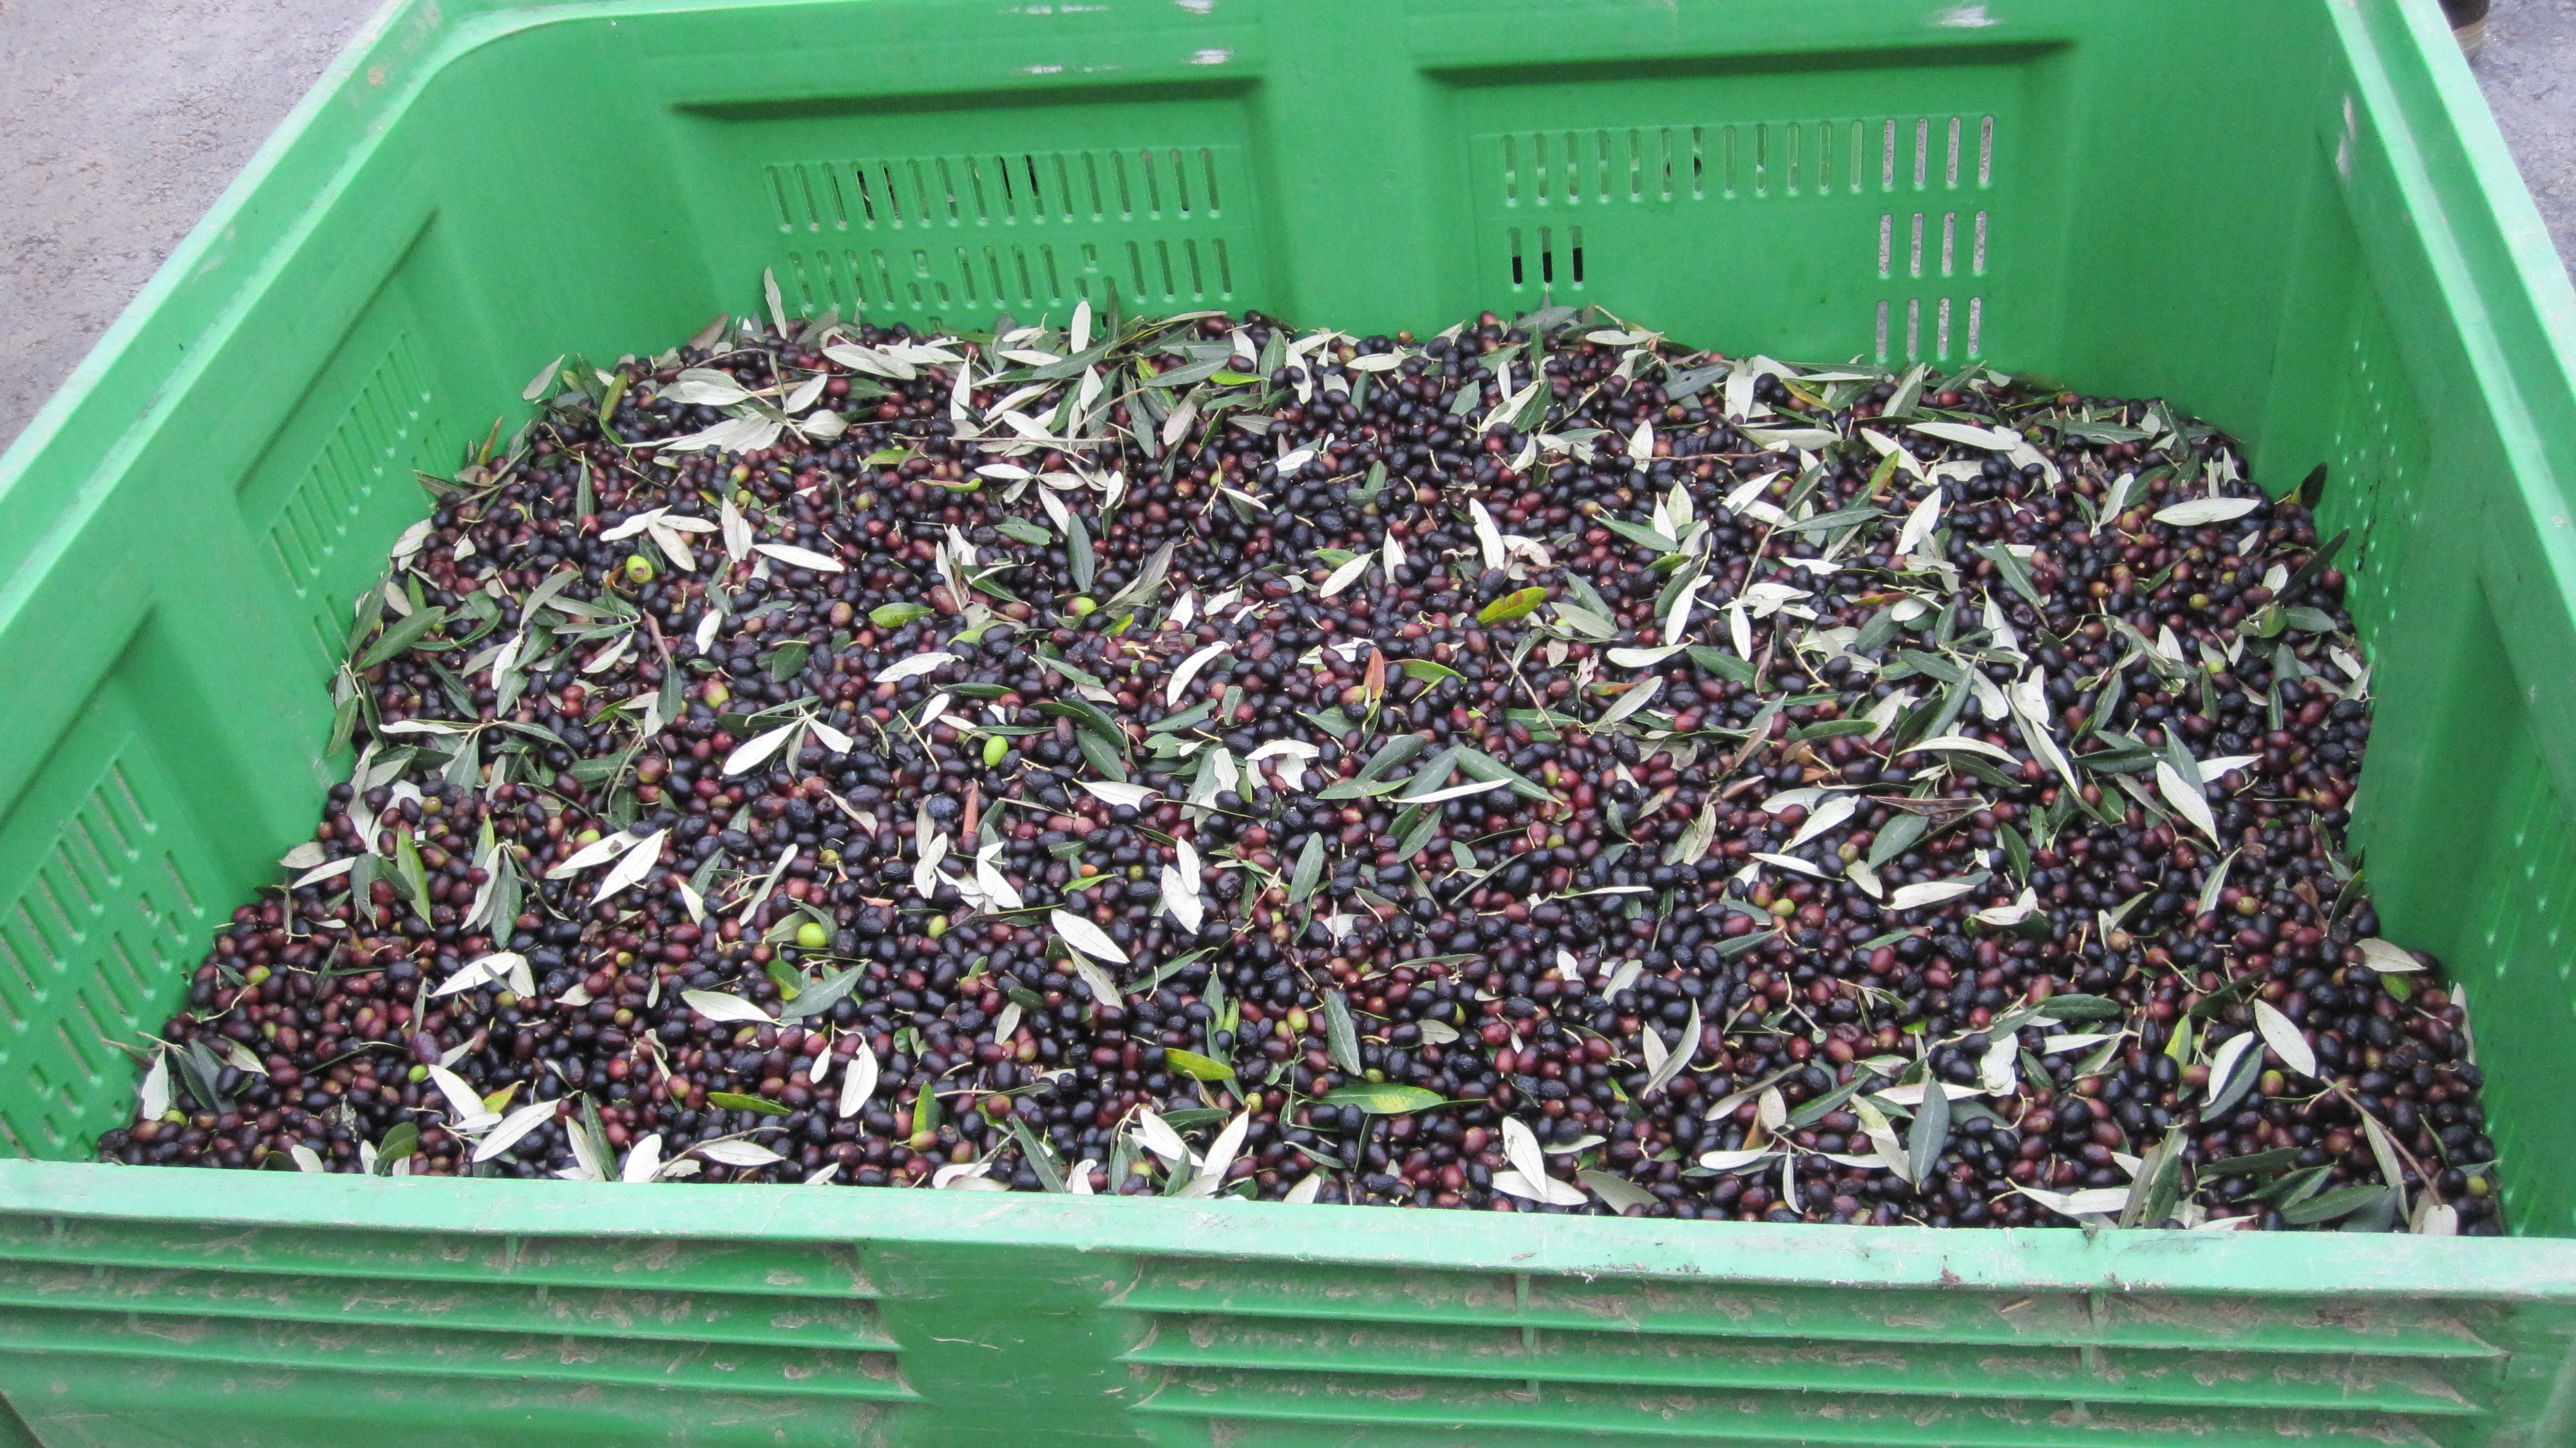 Olives before they are pressed near our Tuscany holiday villas